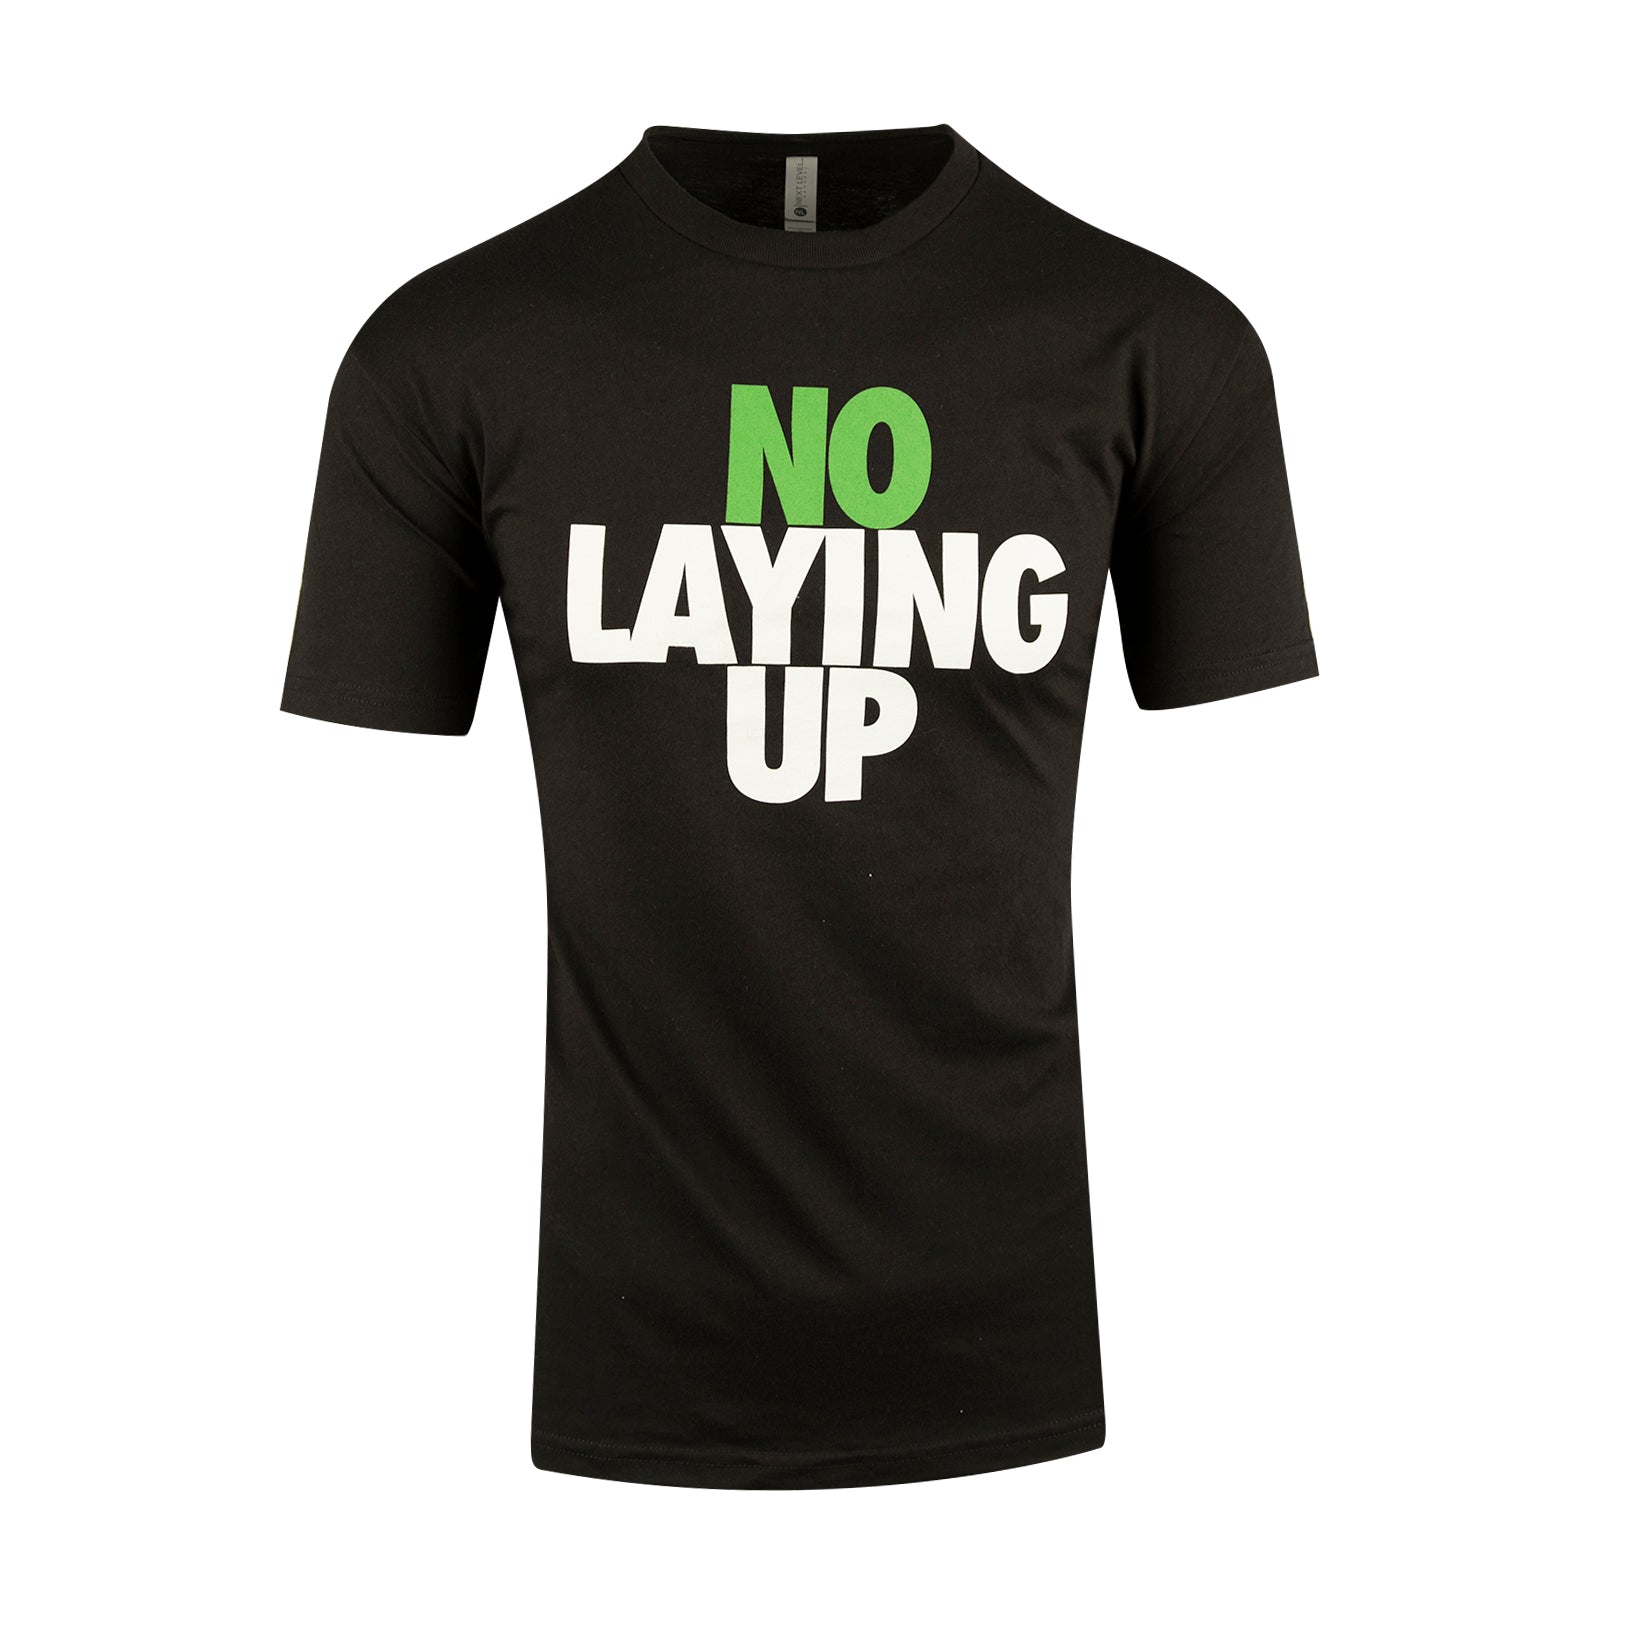 no-laying-up-black-t-shirt-with-green-and-white-logo